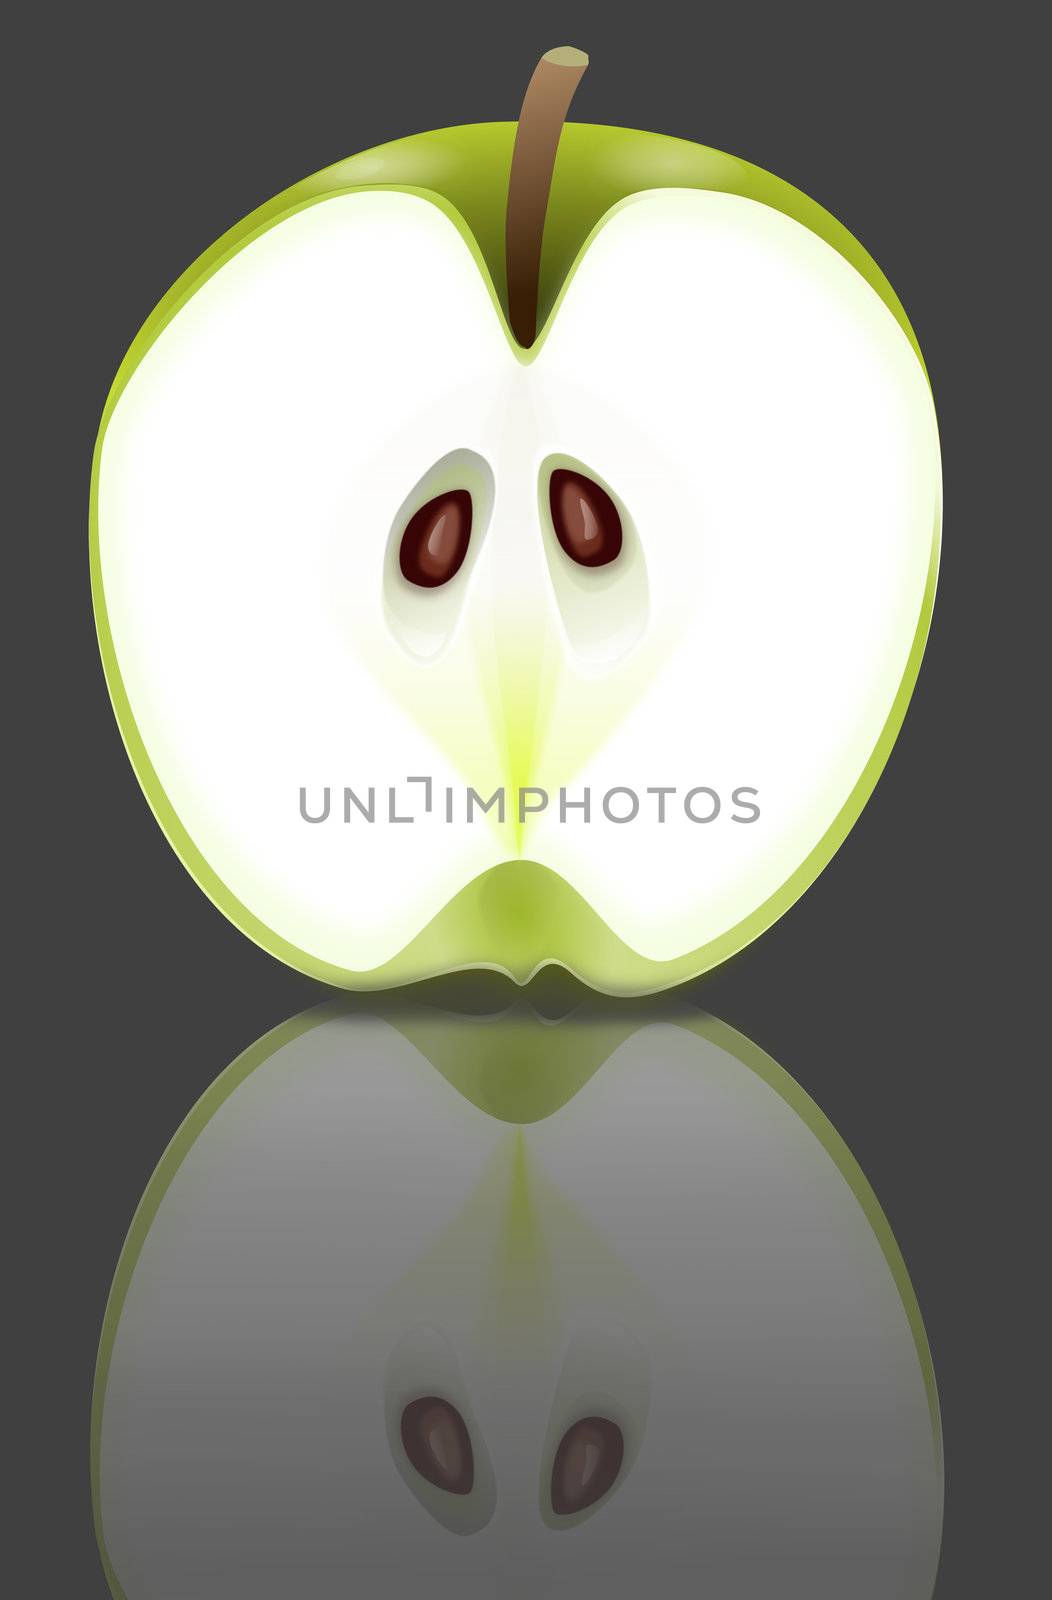 Illustration depicting a fresh green apple half arranged over black background and reflecting into the foreground.